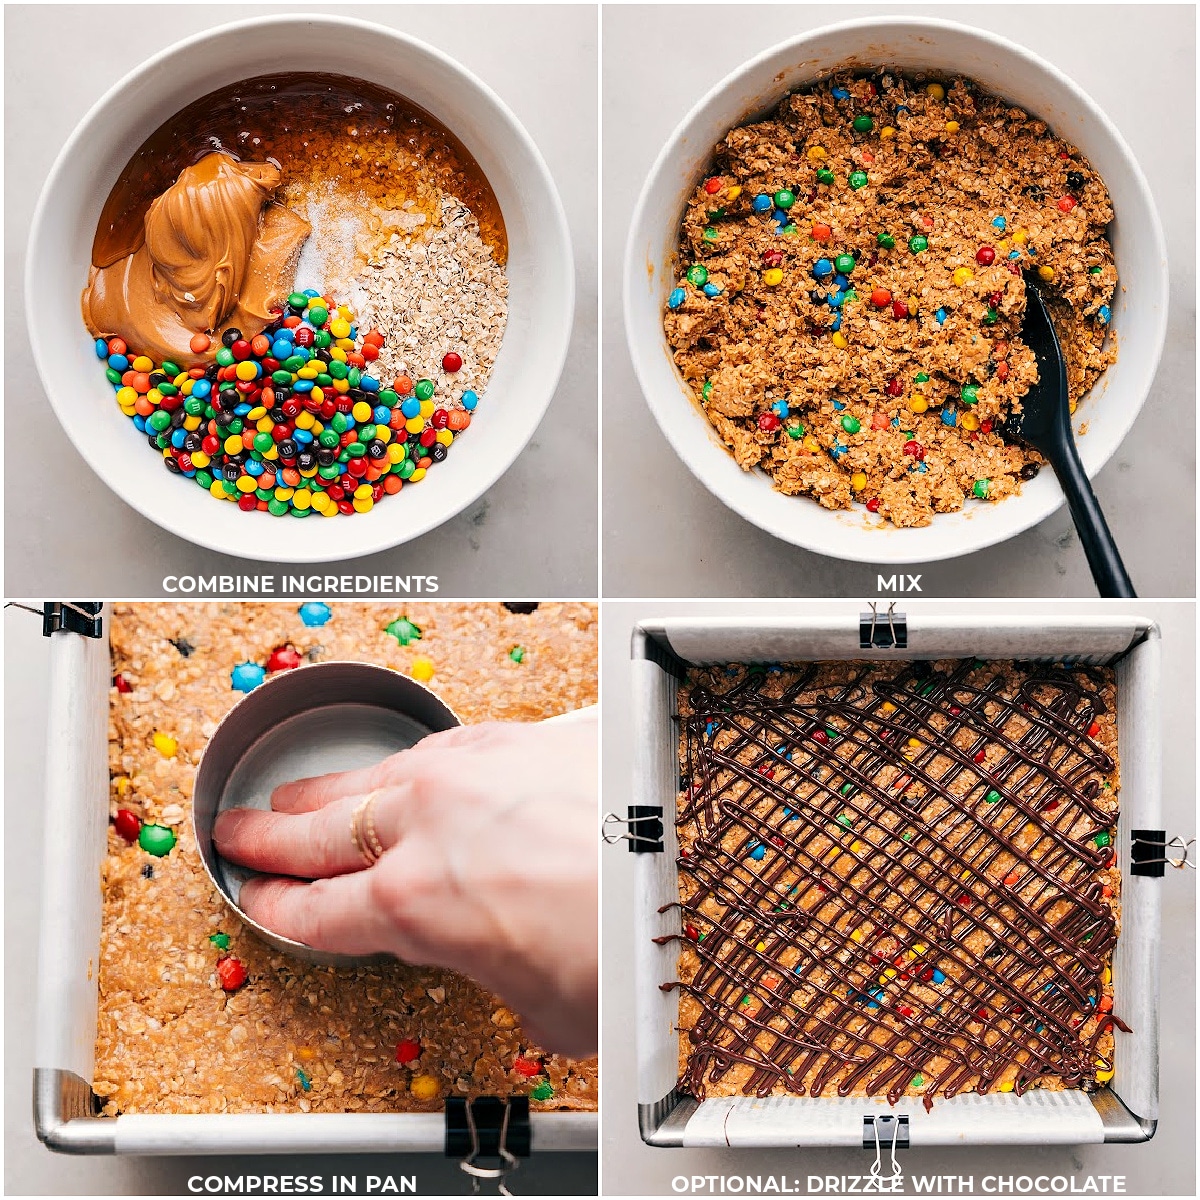 All the ingredients being combined in a bowl for this energy bars recipe. Then the bars being spread in a pan and chocolate being drizzled on top.